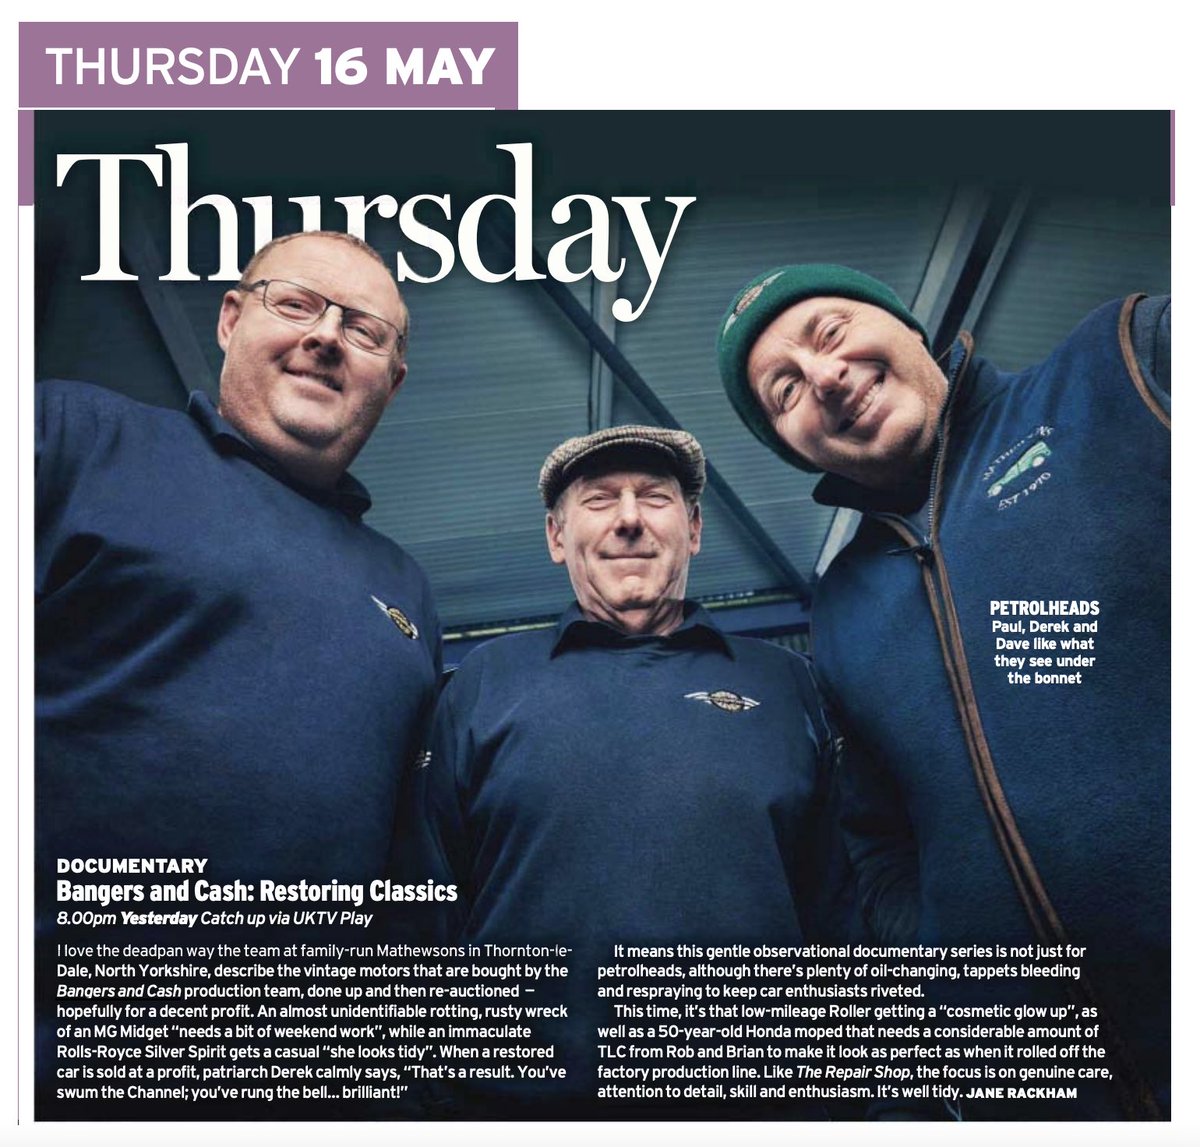 It’s great to see the brand new series of Bangers & Cash: Restoring Classics being featured in this week’s @RadioTimes. 
It all starts next Thursday at 8pm on @YesterdayTweets 
#bangersandcash